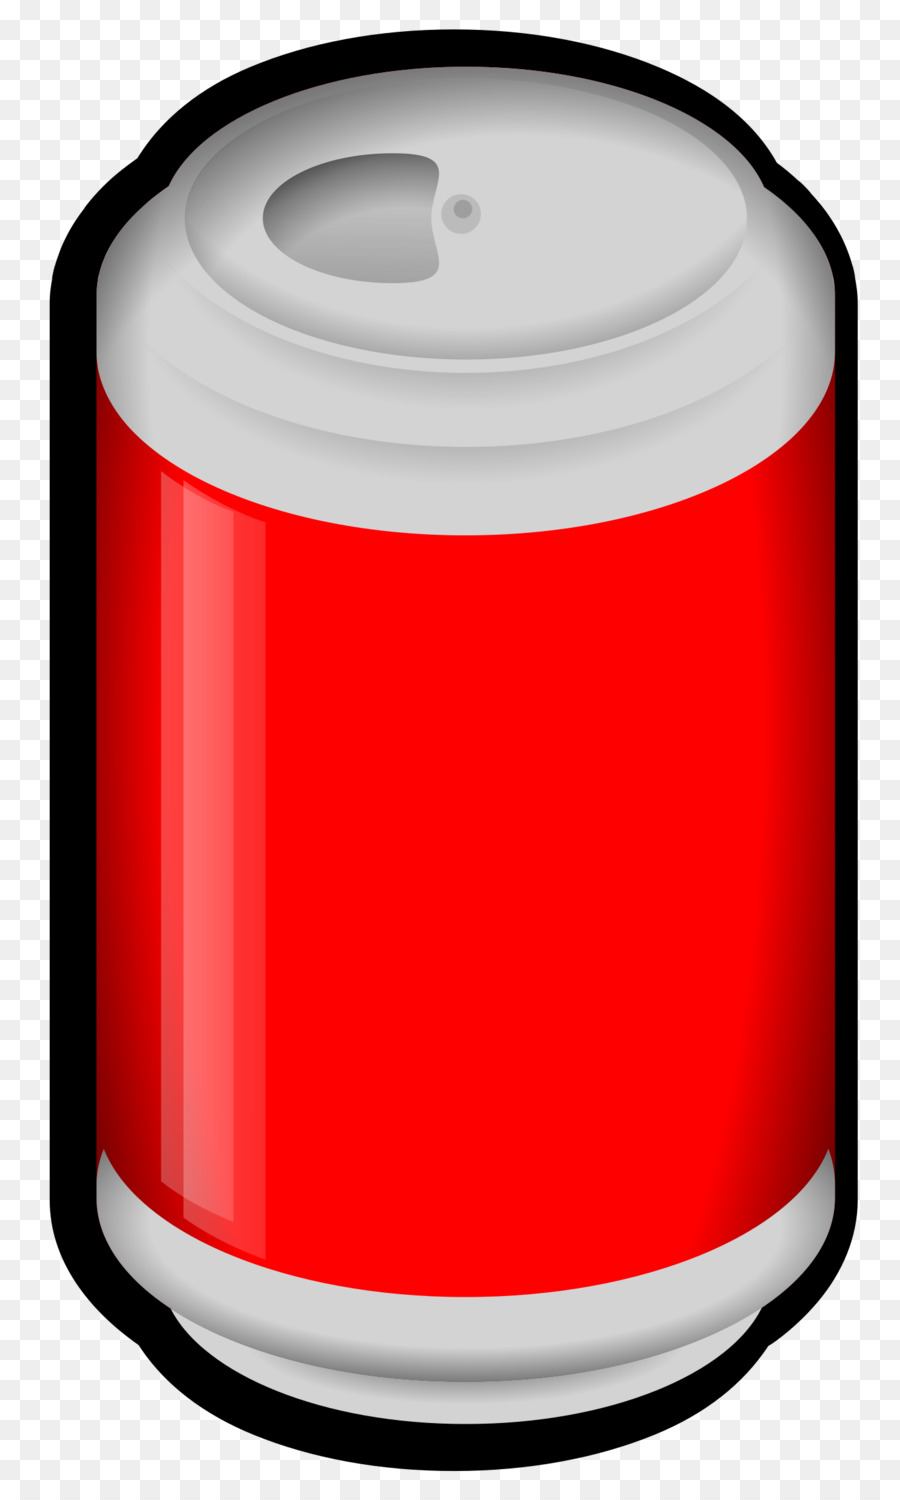 Coke can background.